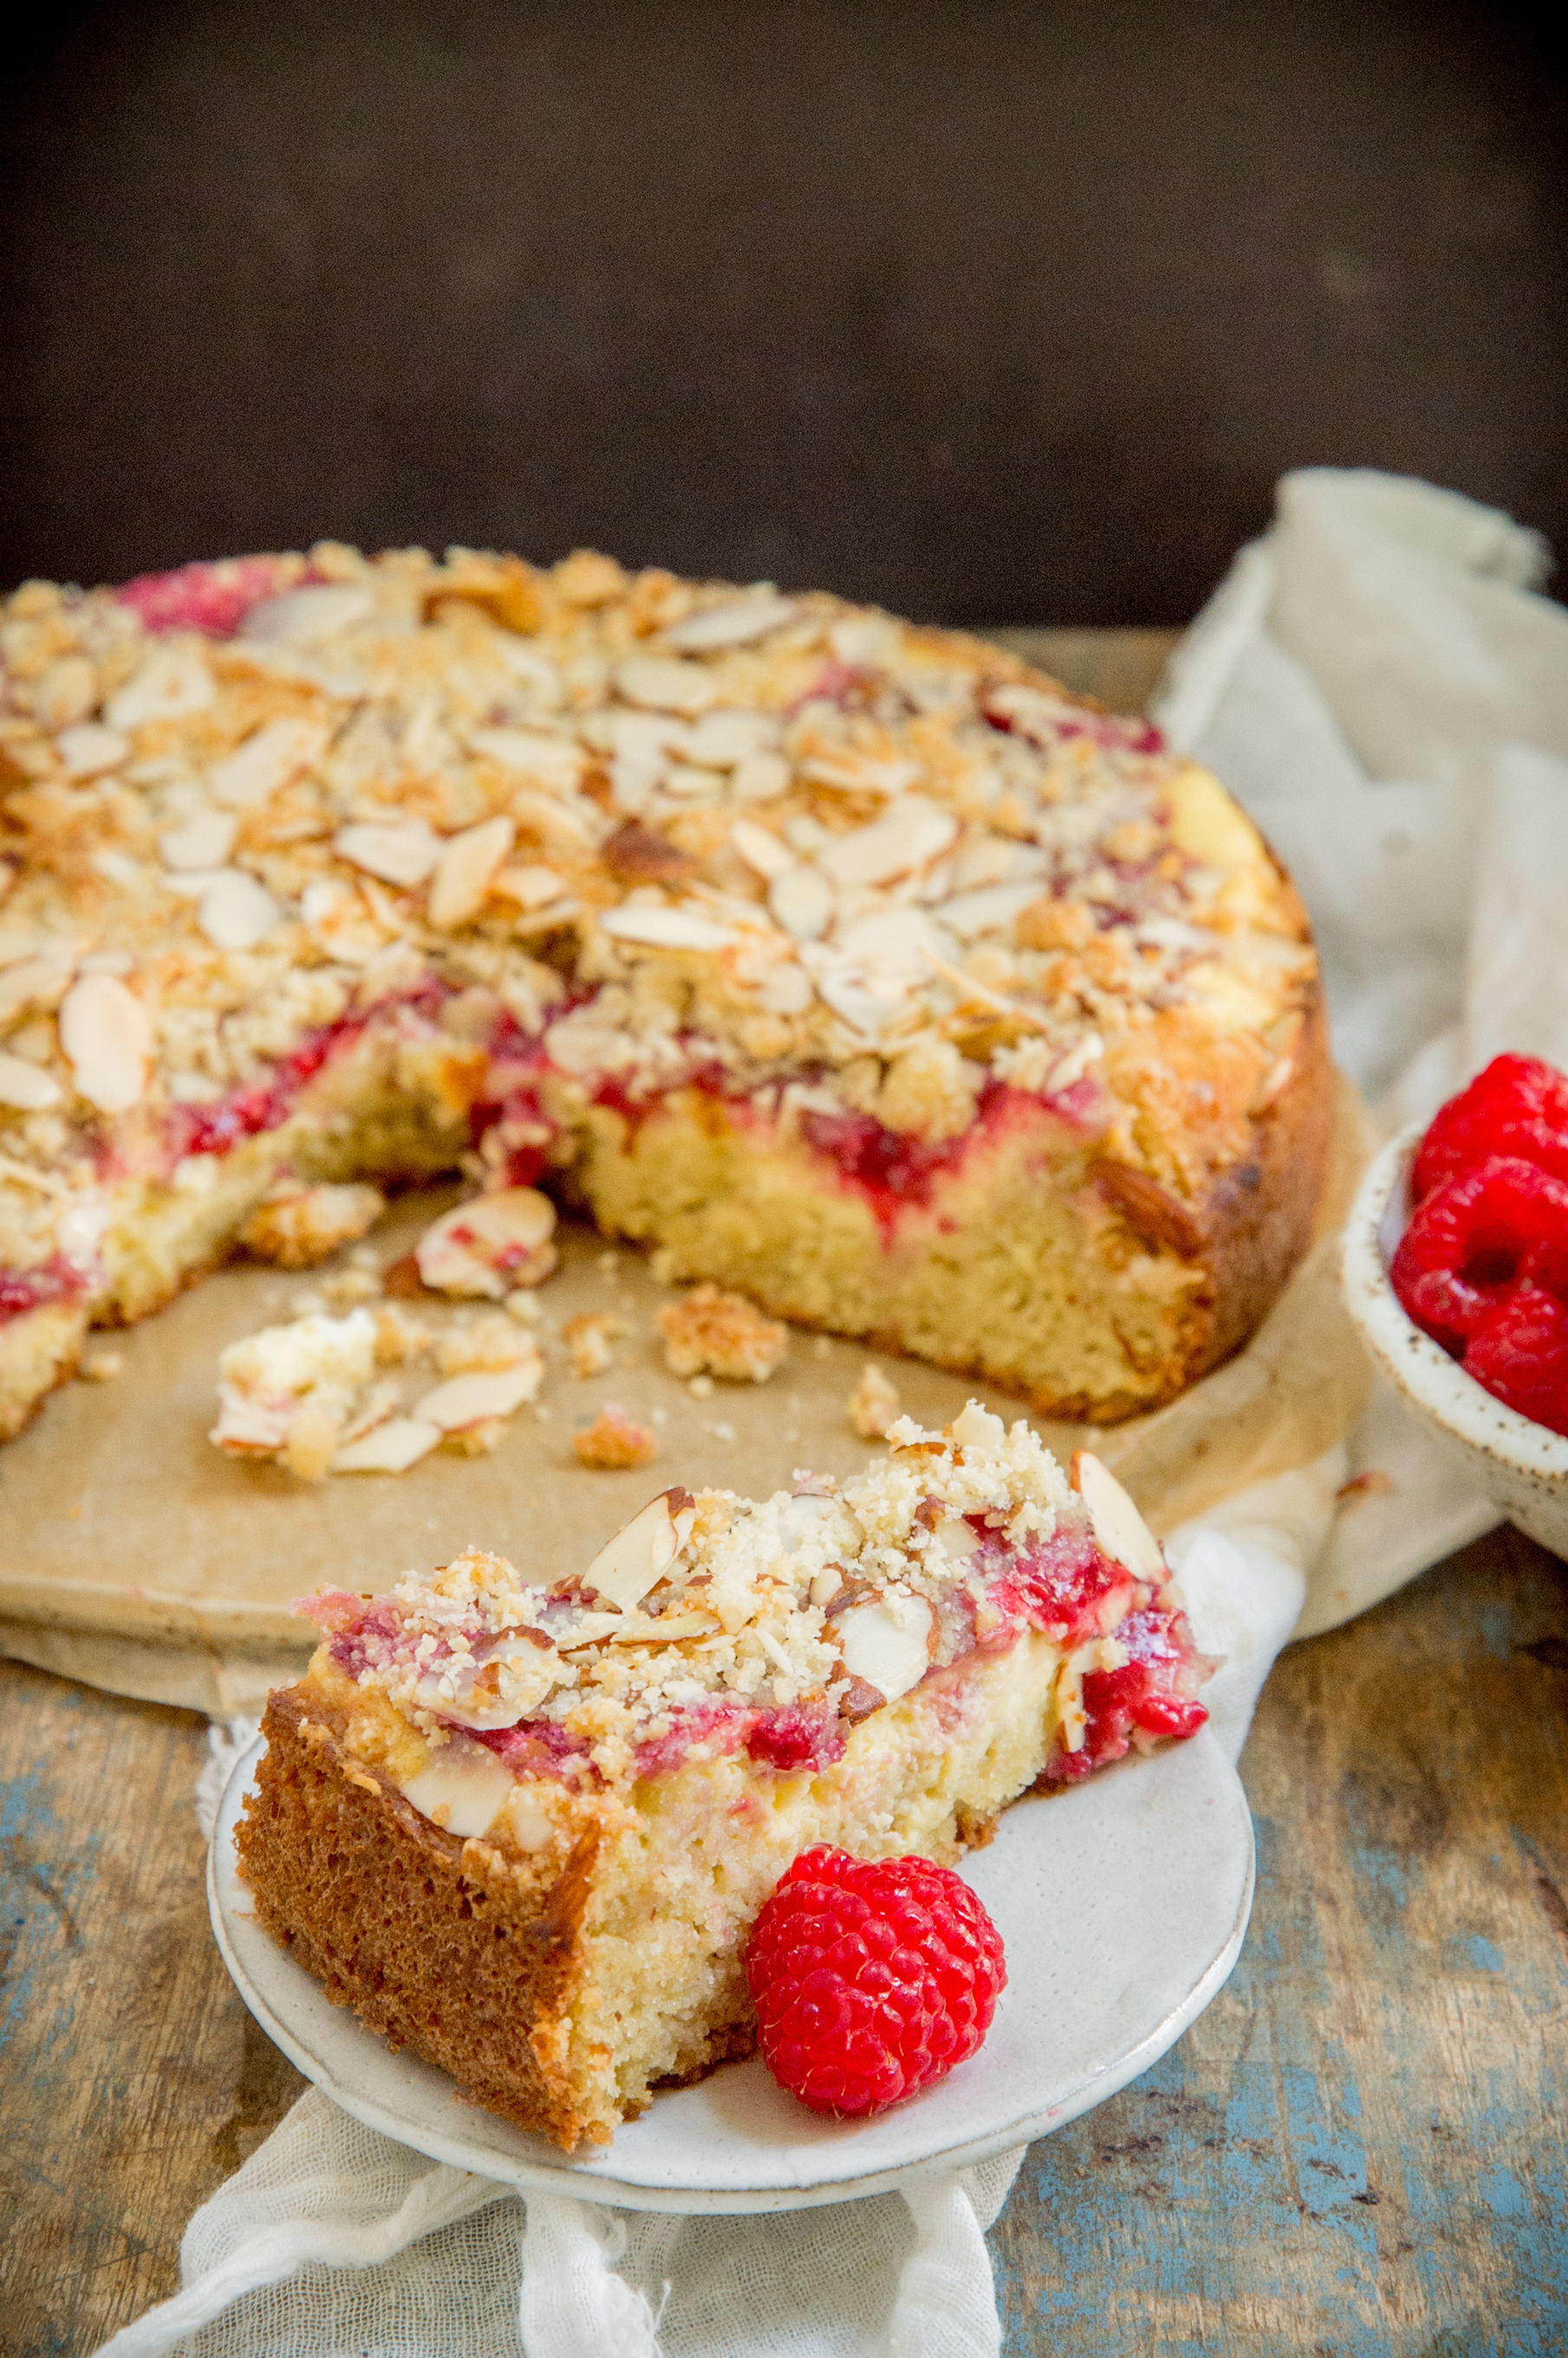 Keto Raspberry Cream Cheese Coffee Cake-A piece with the rest of the cake in the background.